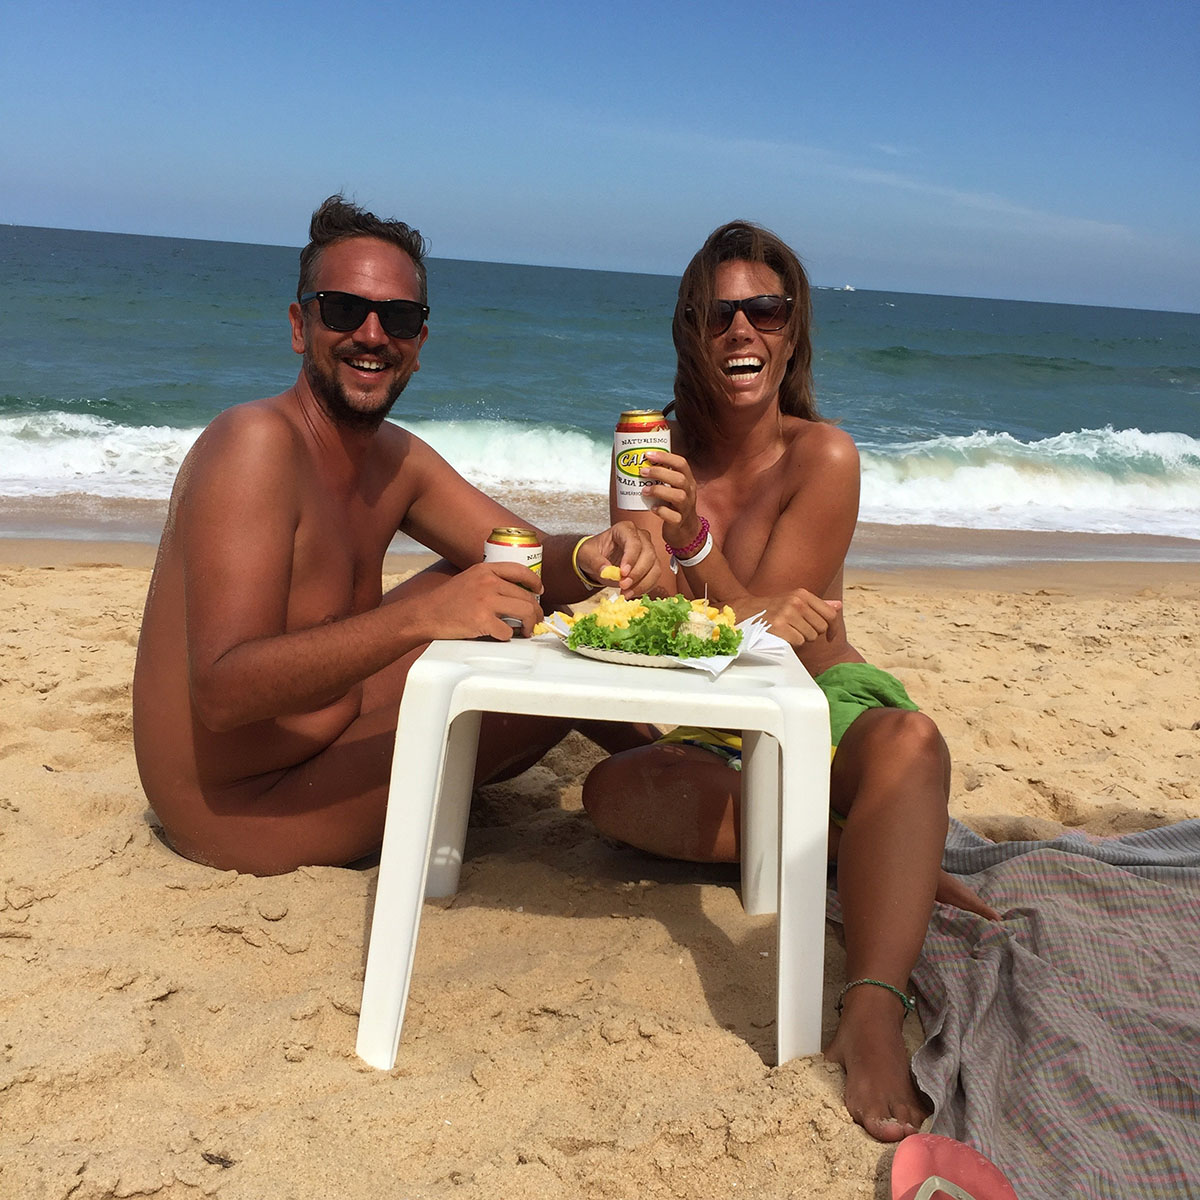 8 Tips for going nude in Brazil